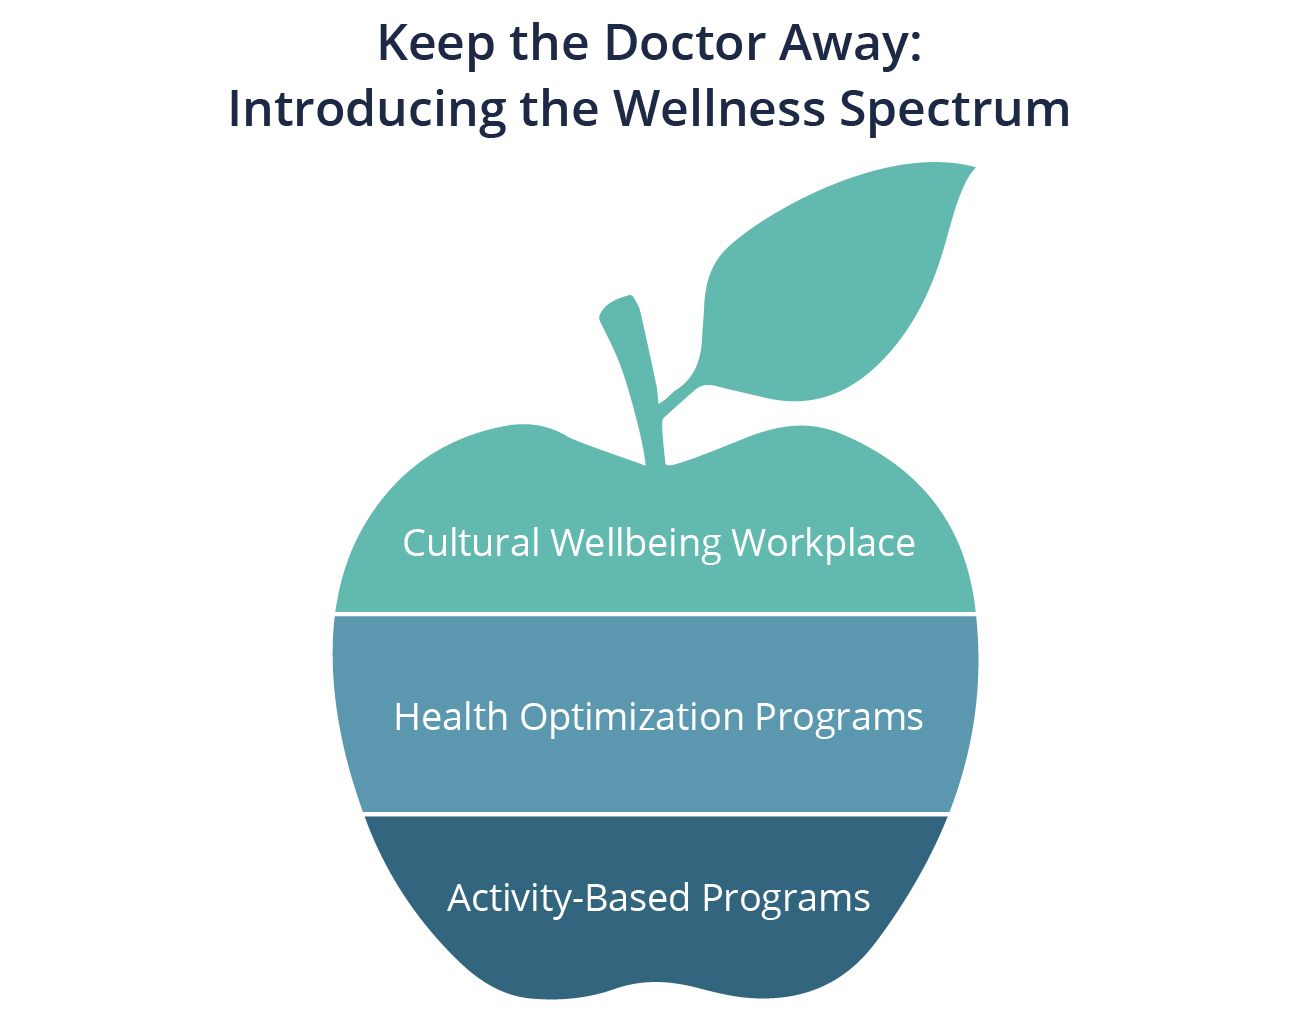 Illustration of an apple broken into three components of a wellness spectrum: Activity-based programs, health optimization programs, cultural wellbeing workplace